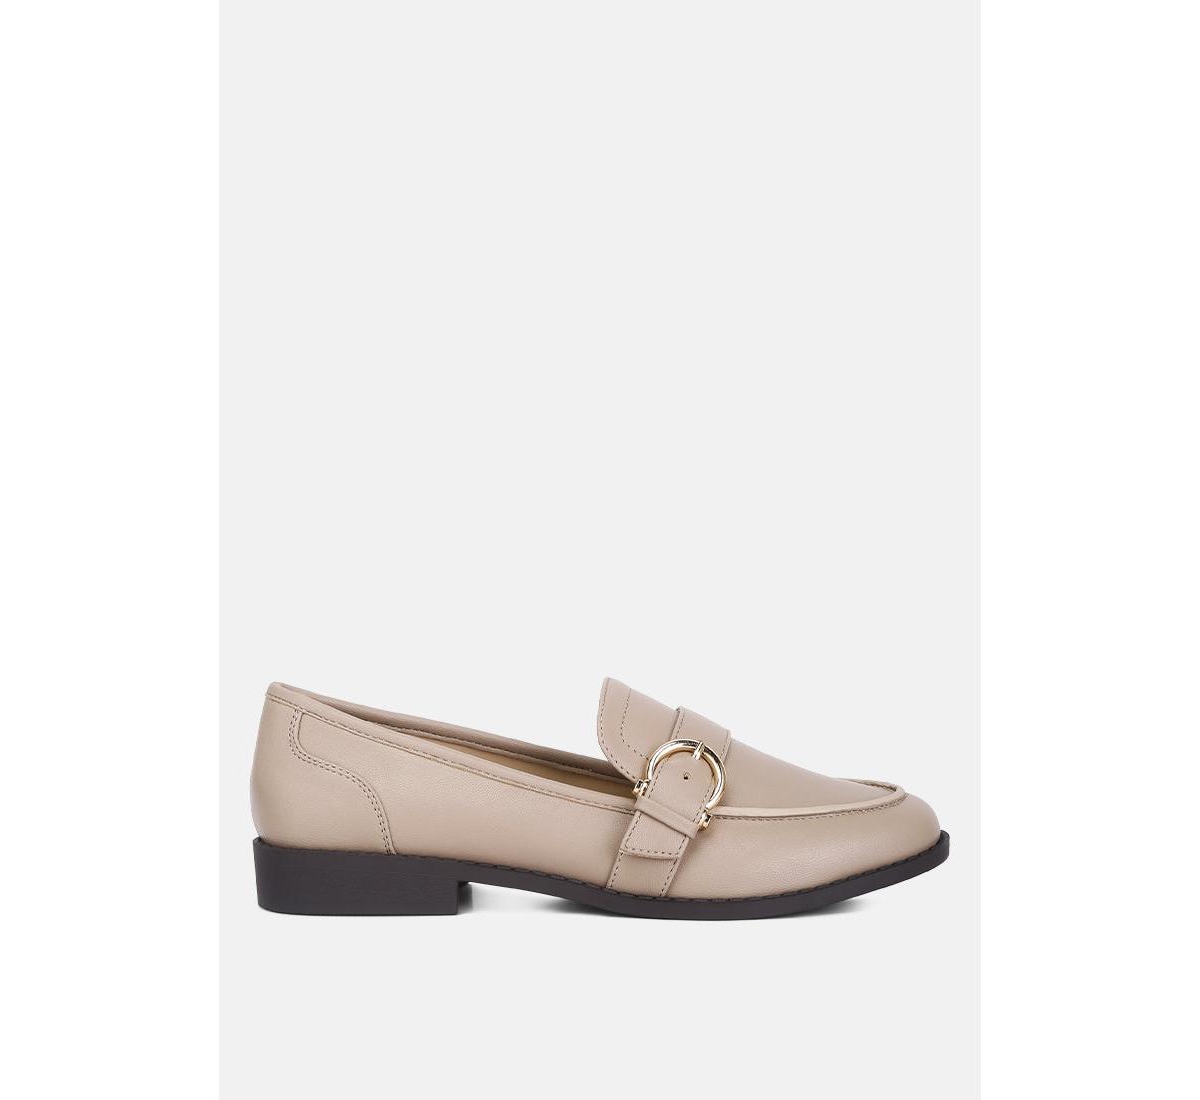 sheboss buckle detail loafers - Taupe